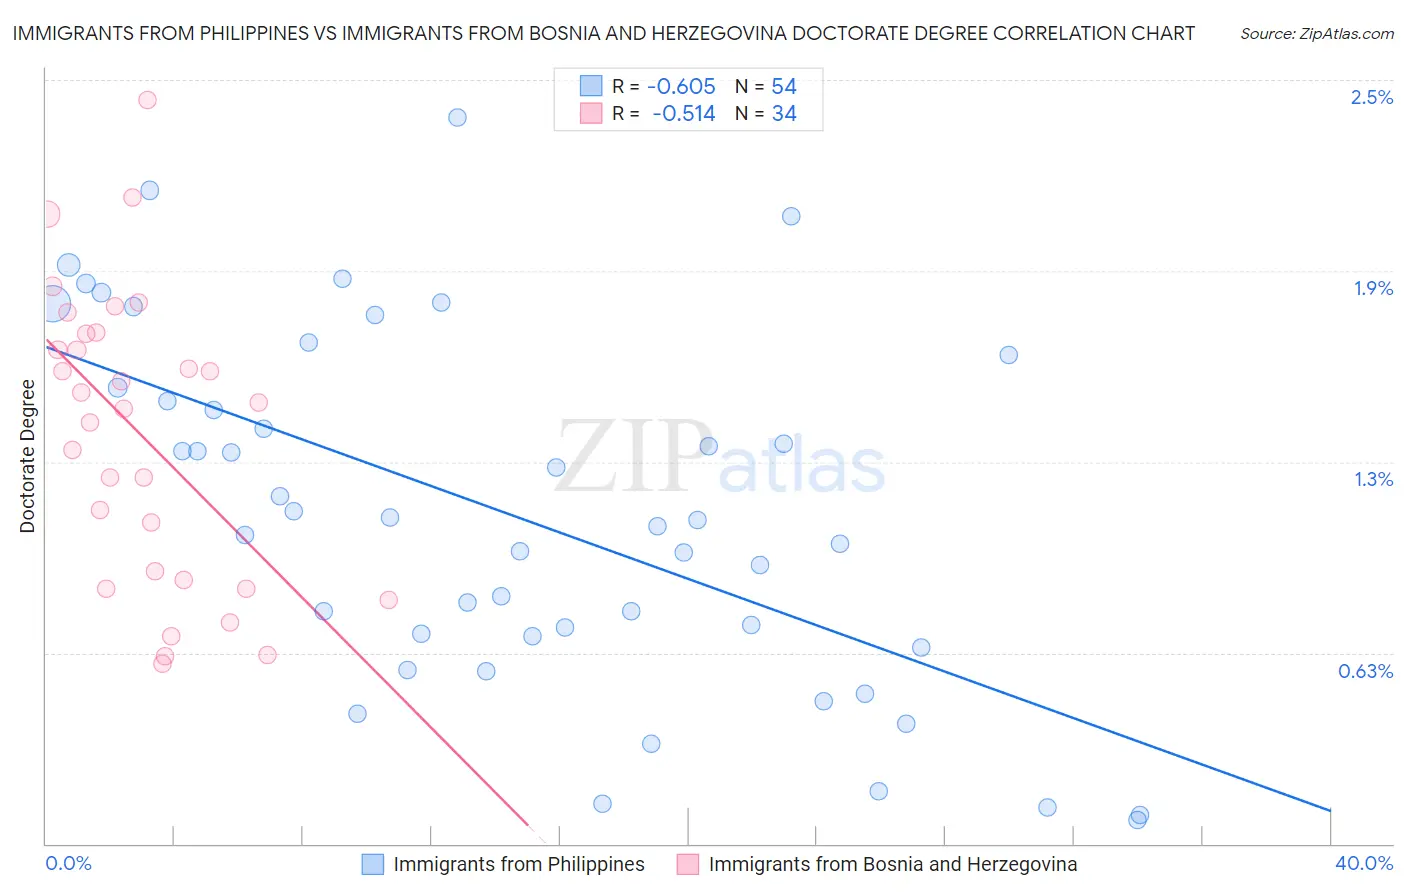 Immigrants from Philippines vs Immigrants from Bosnia and Herzegovina Doctorate Degree